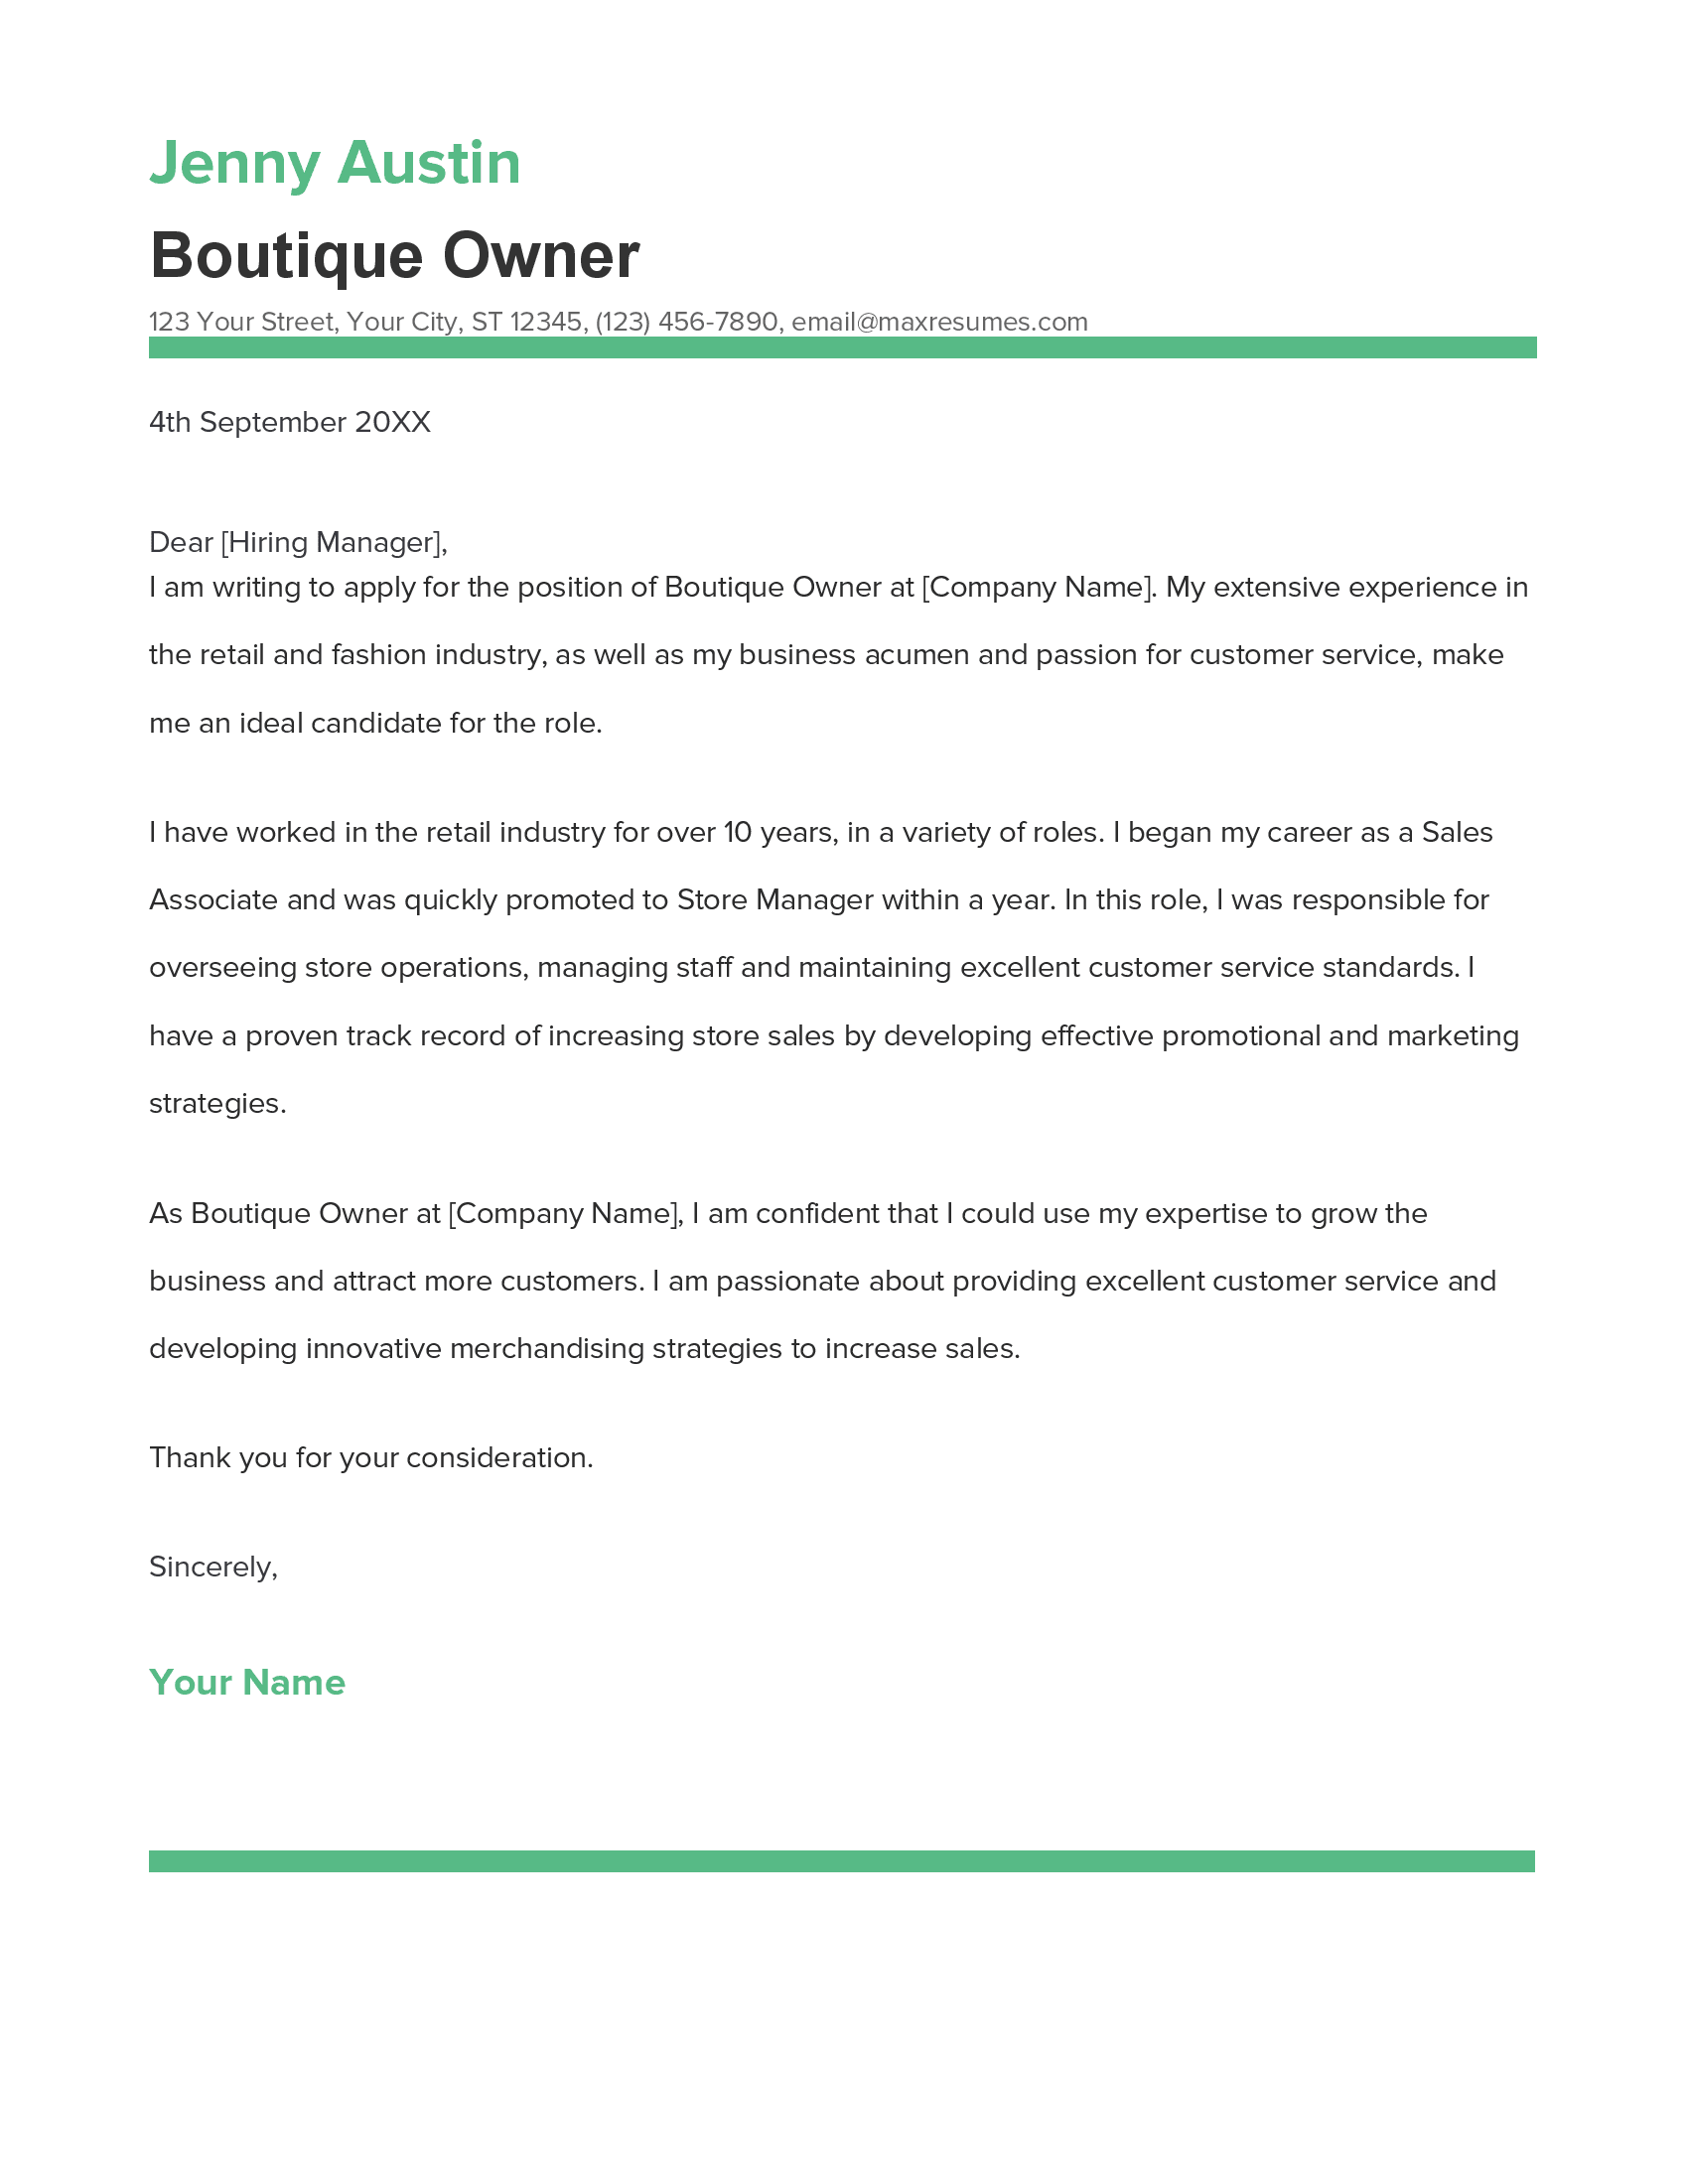 Boutique Owner Cover Letter Example